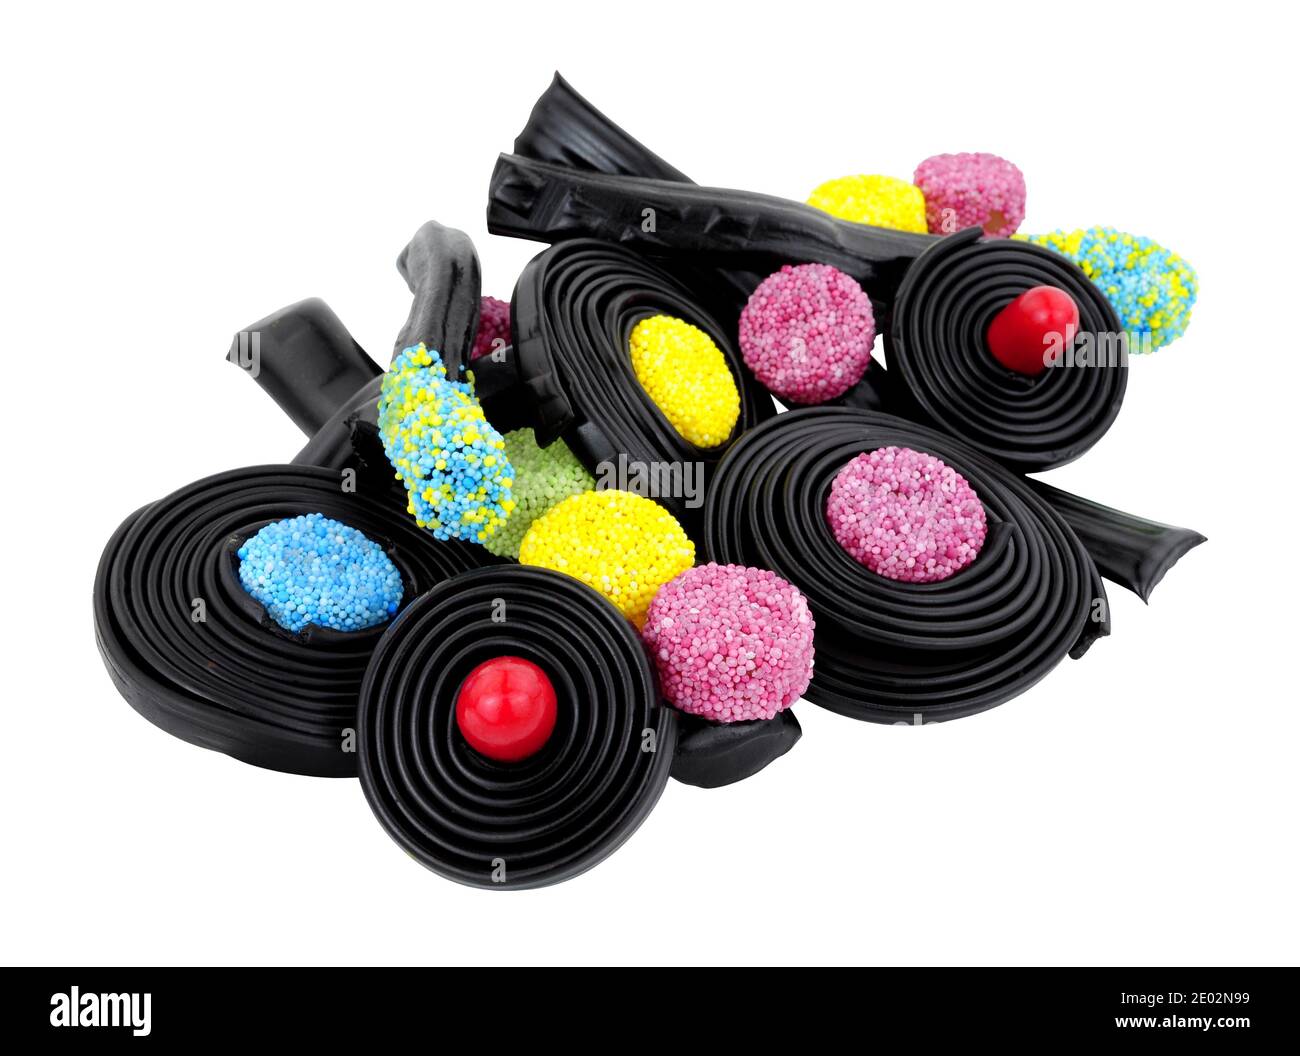 Group of novelty liquorice sweets including Catherine wheels, spinning tops and traffic lights isolated on a white background Stock Photo